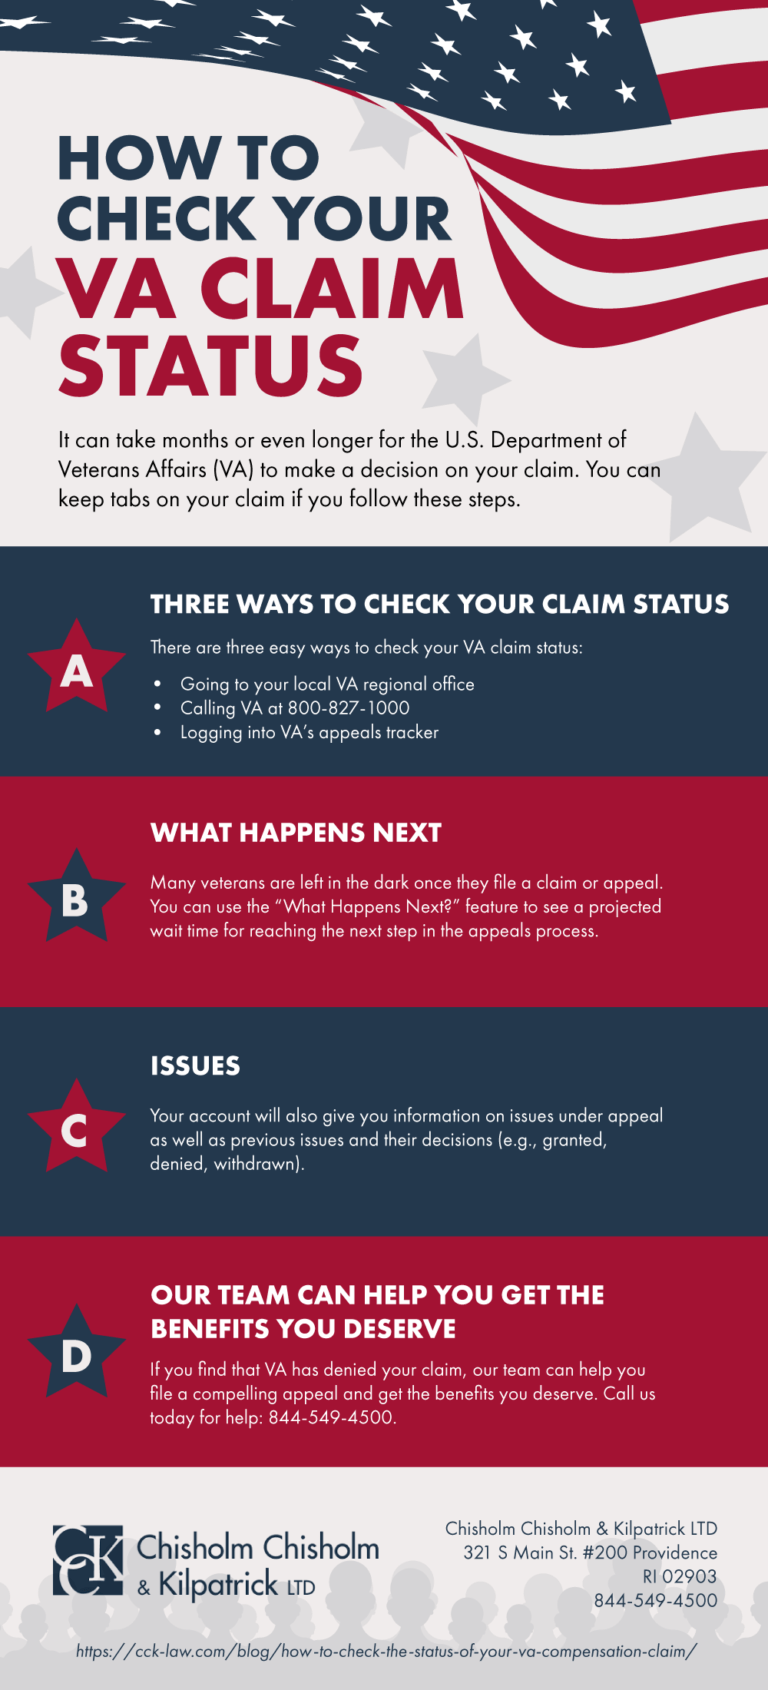 How to Check the Status of your VA Compensation Claim CCK Law